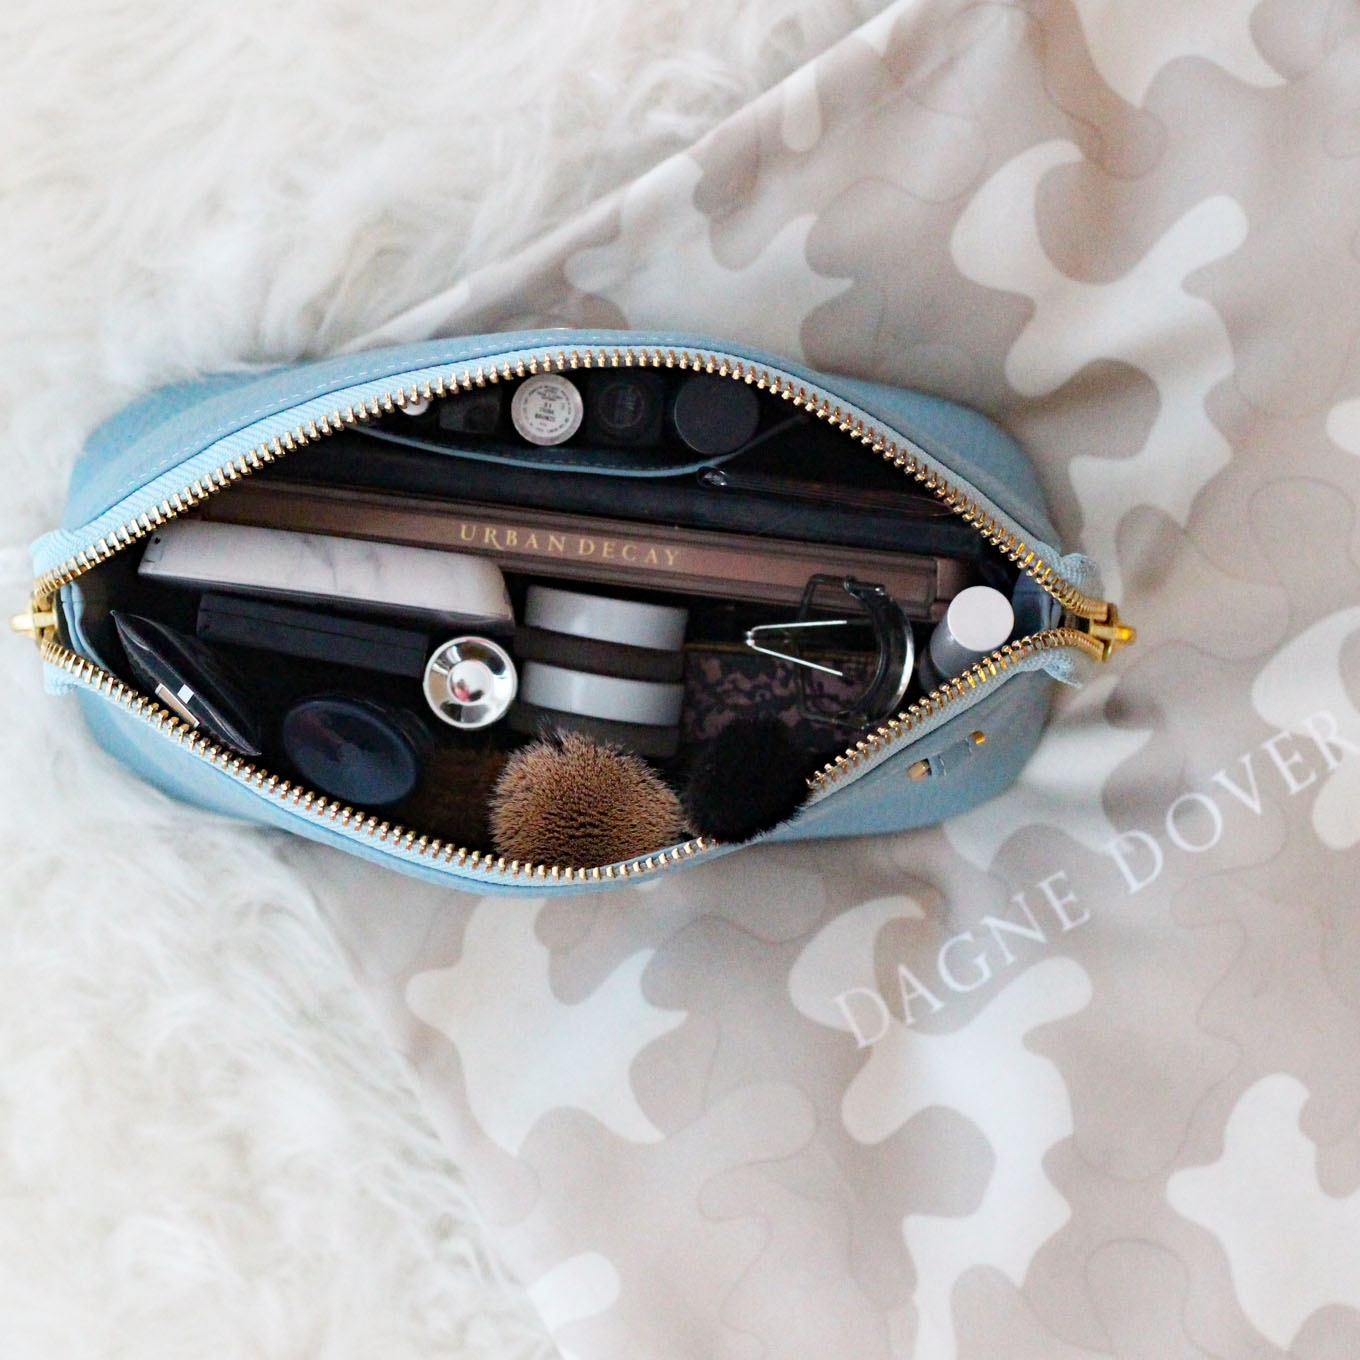 Lifestyle Blogger Roxanne of Glass of Glam's Review of the Dagne Dover Lola Pouch